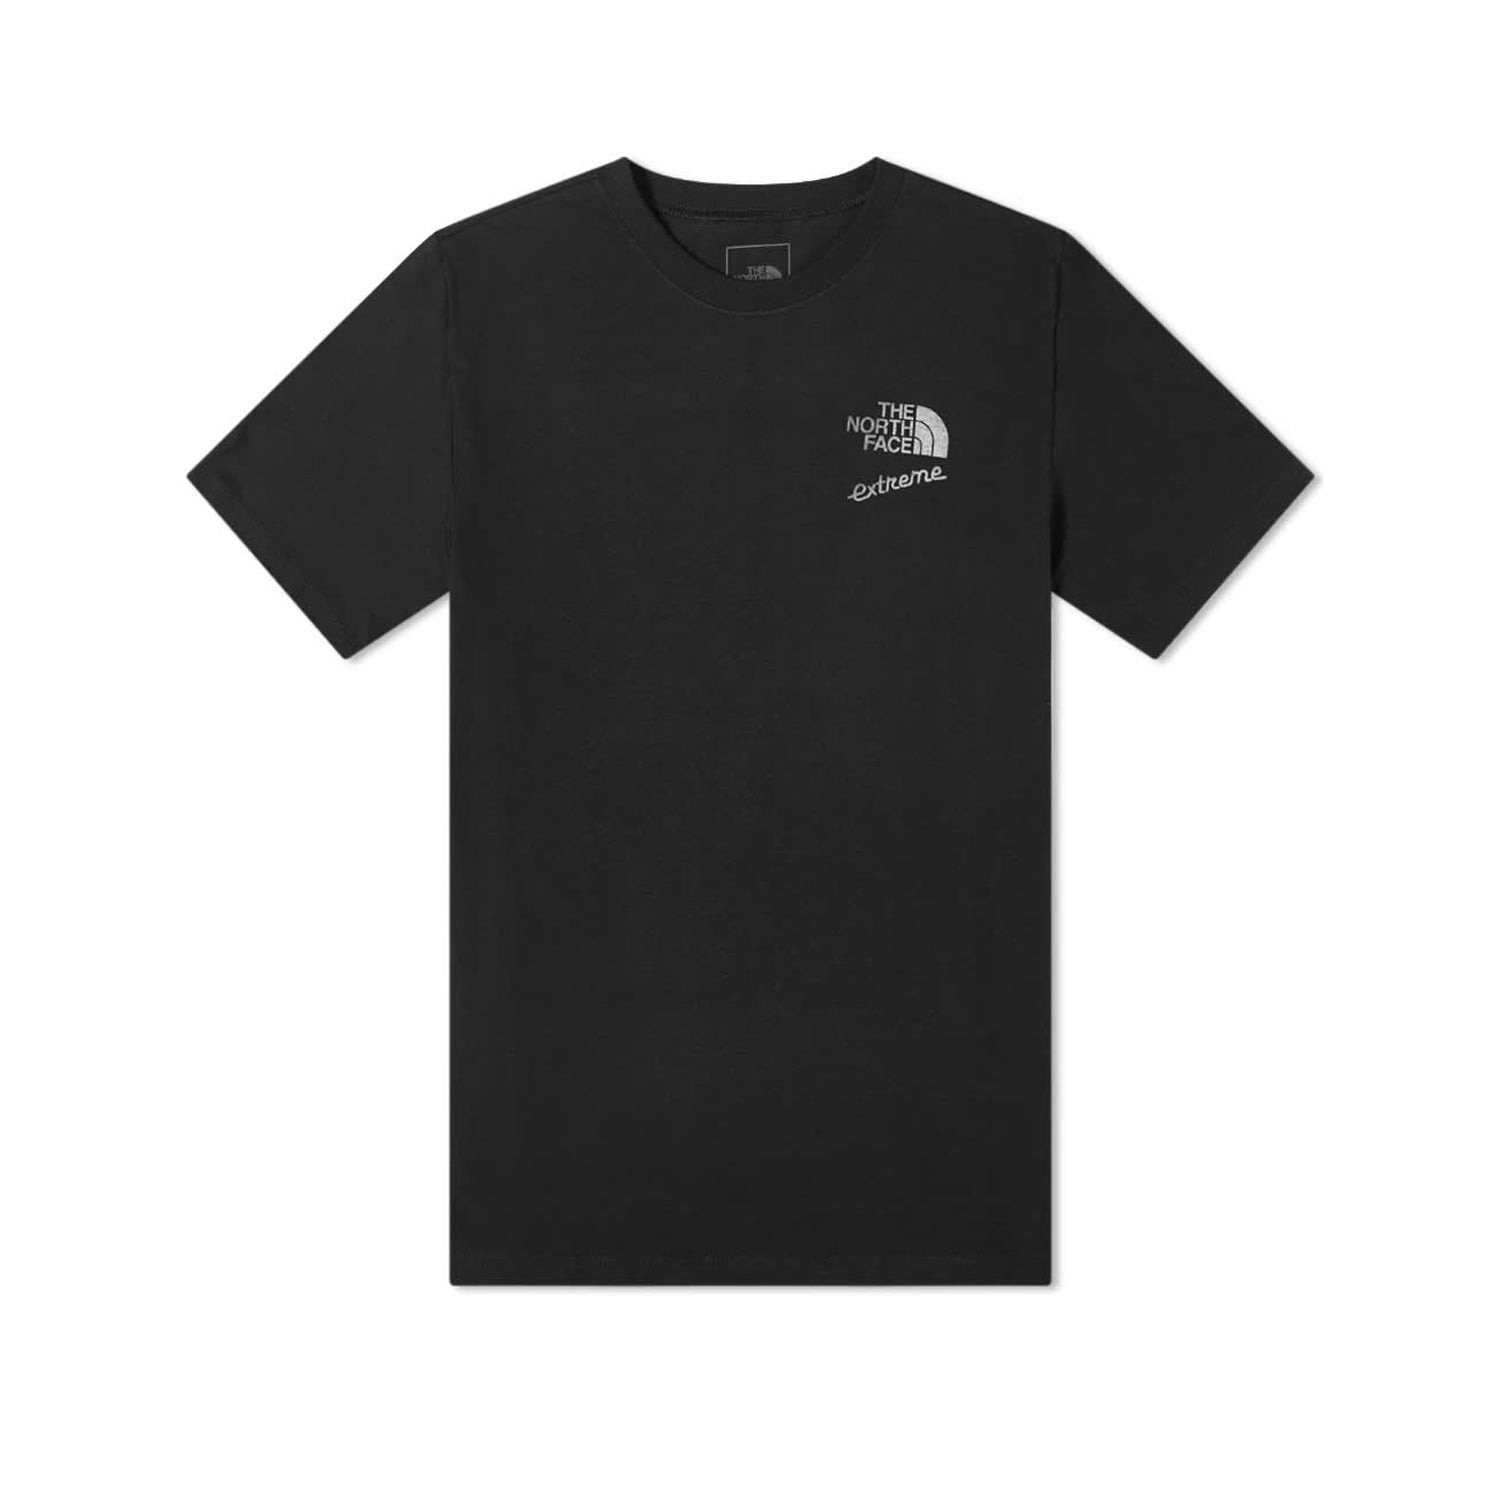 The North Face SS Extreme Tee Black